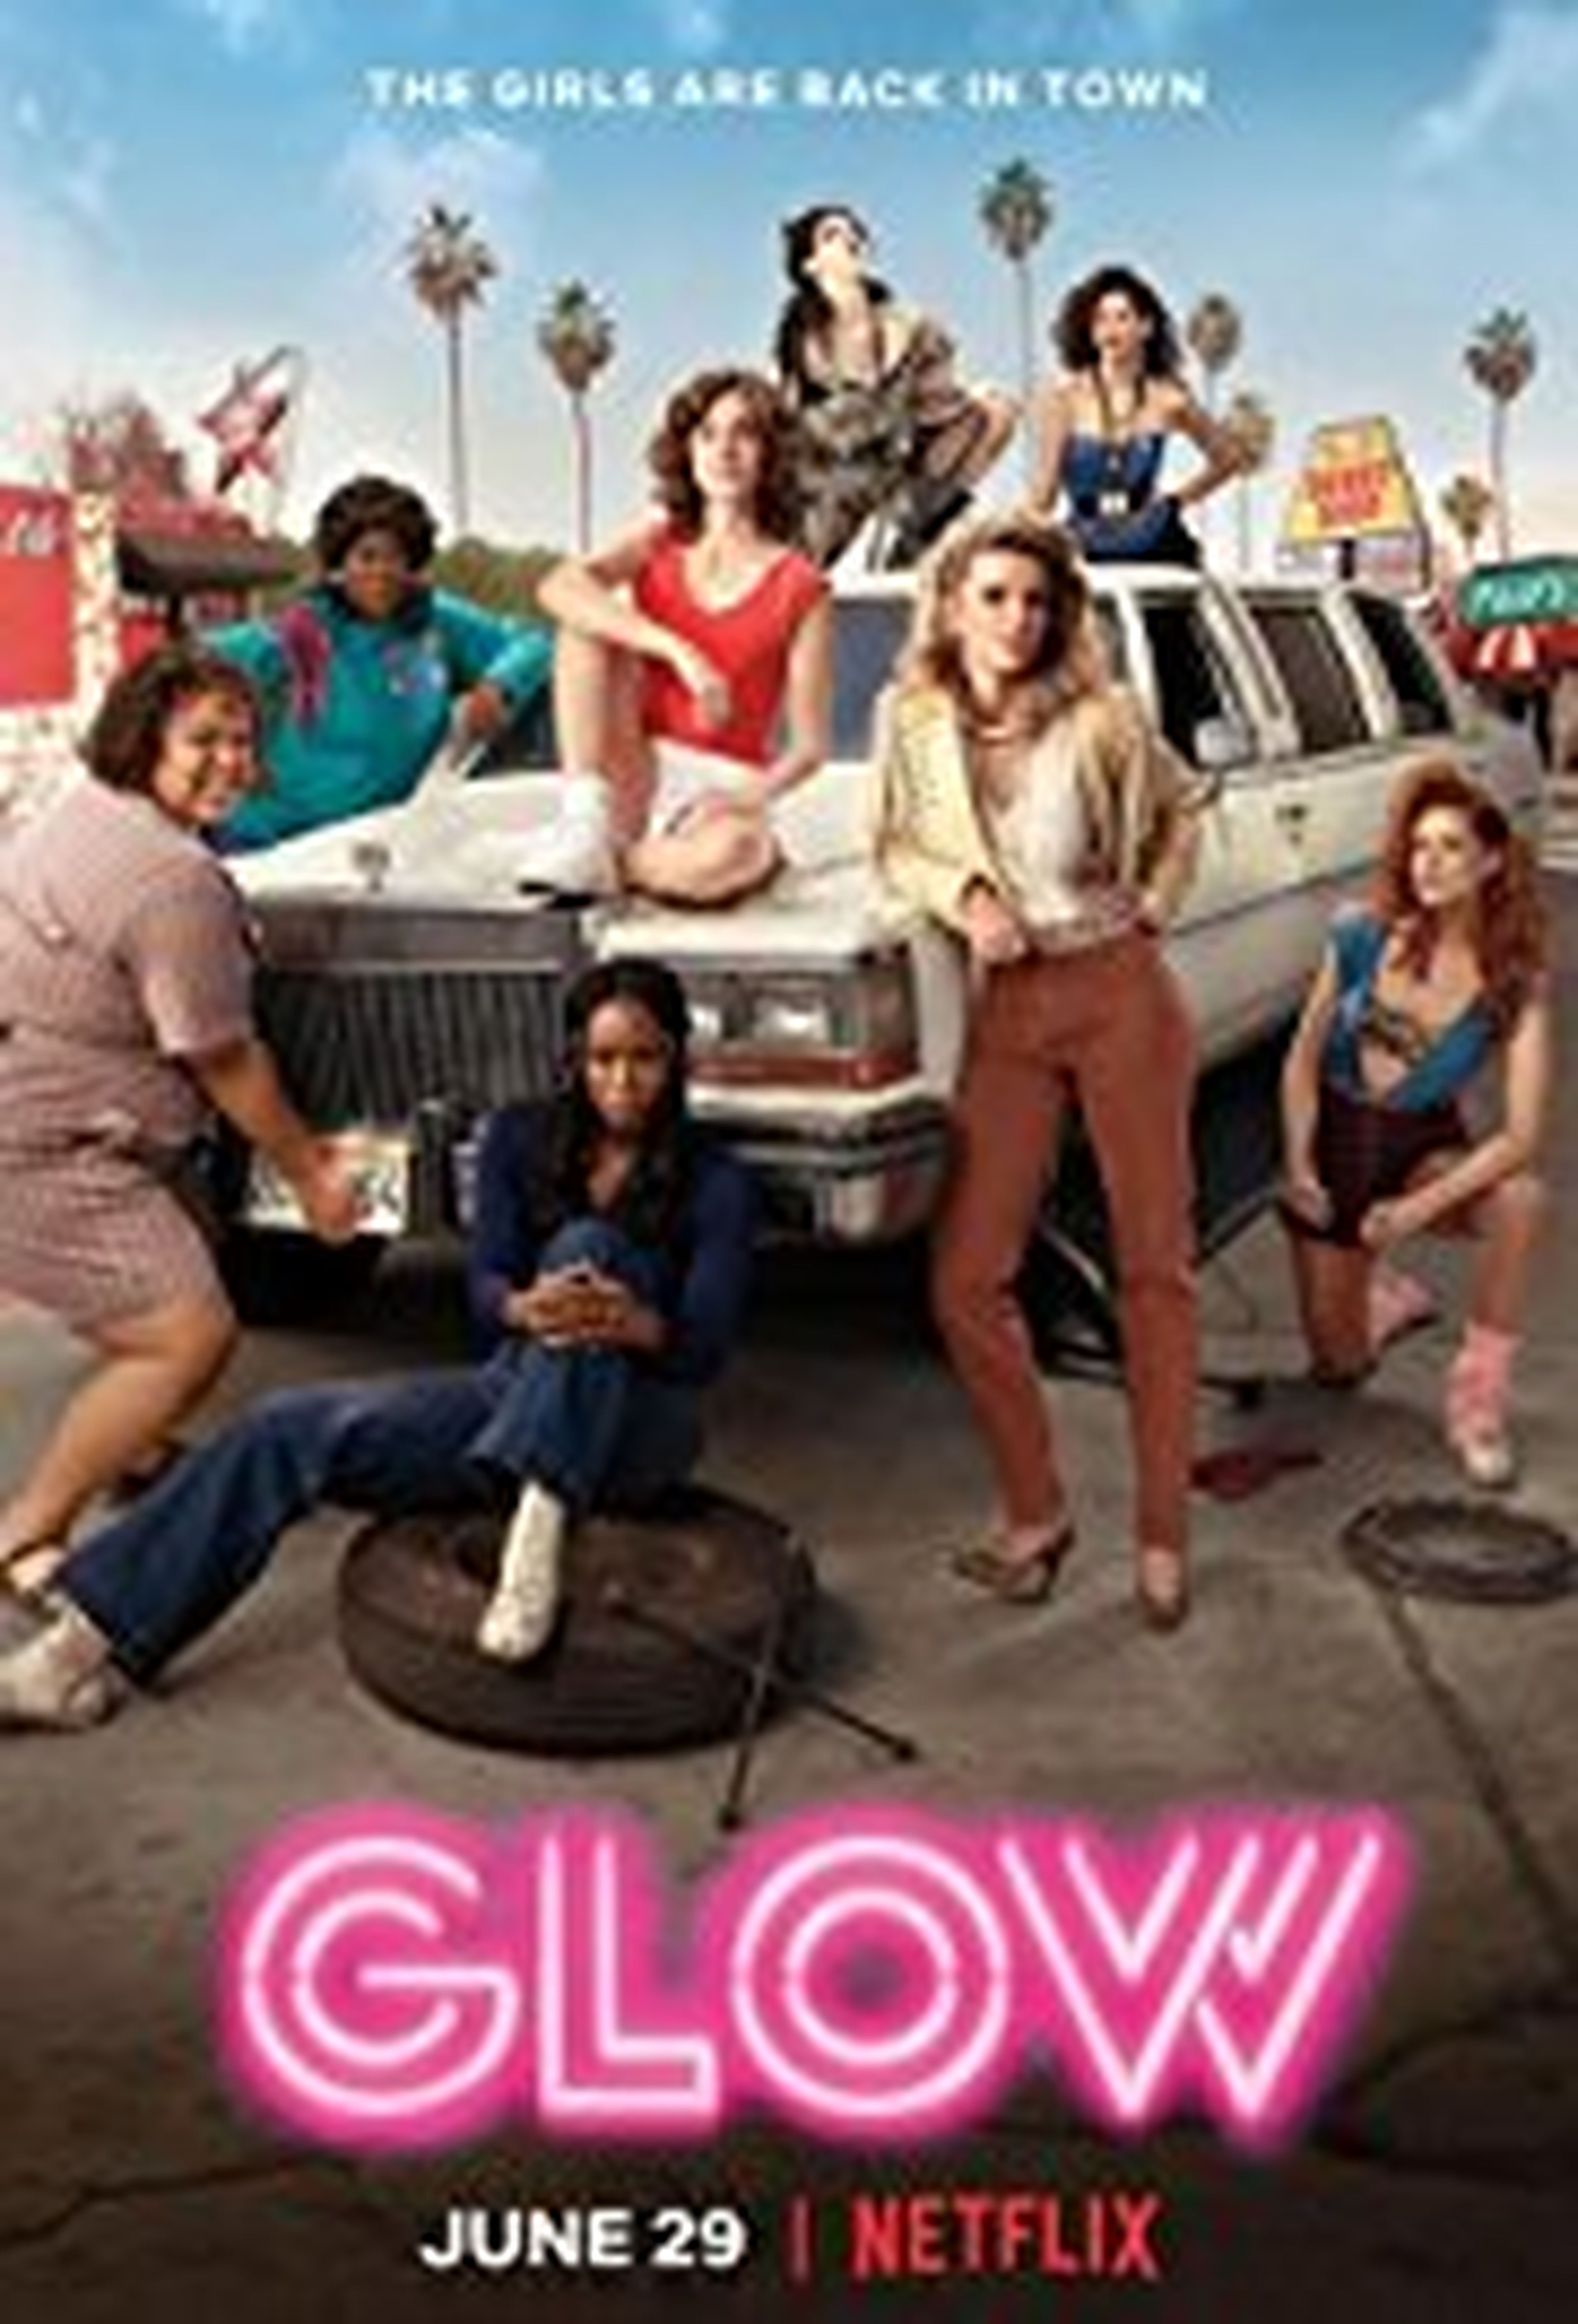 Glow Cover